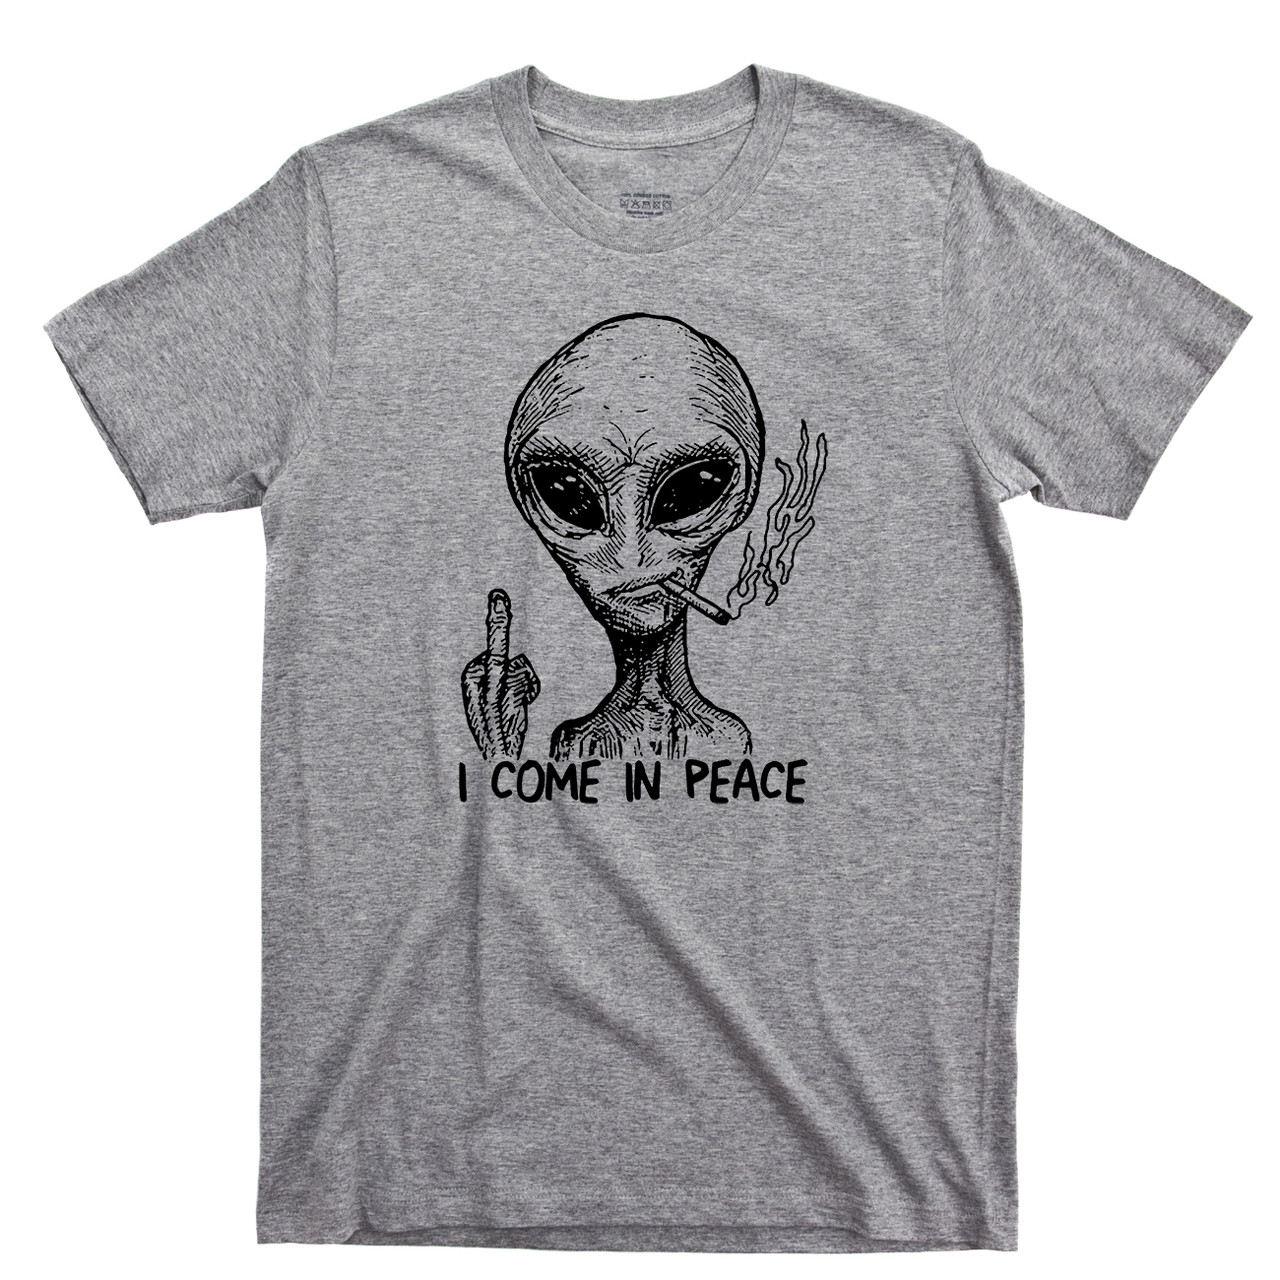 Ufo T Shirt Abduction Shirt Just Waiting For Aliens To Fetch Me Tee Alien Shirt Alien Abduction Ufo Shirt Alien T-Shirt Area 51